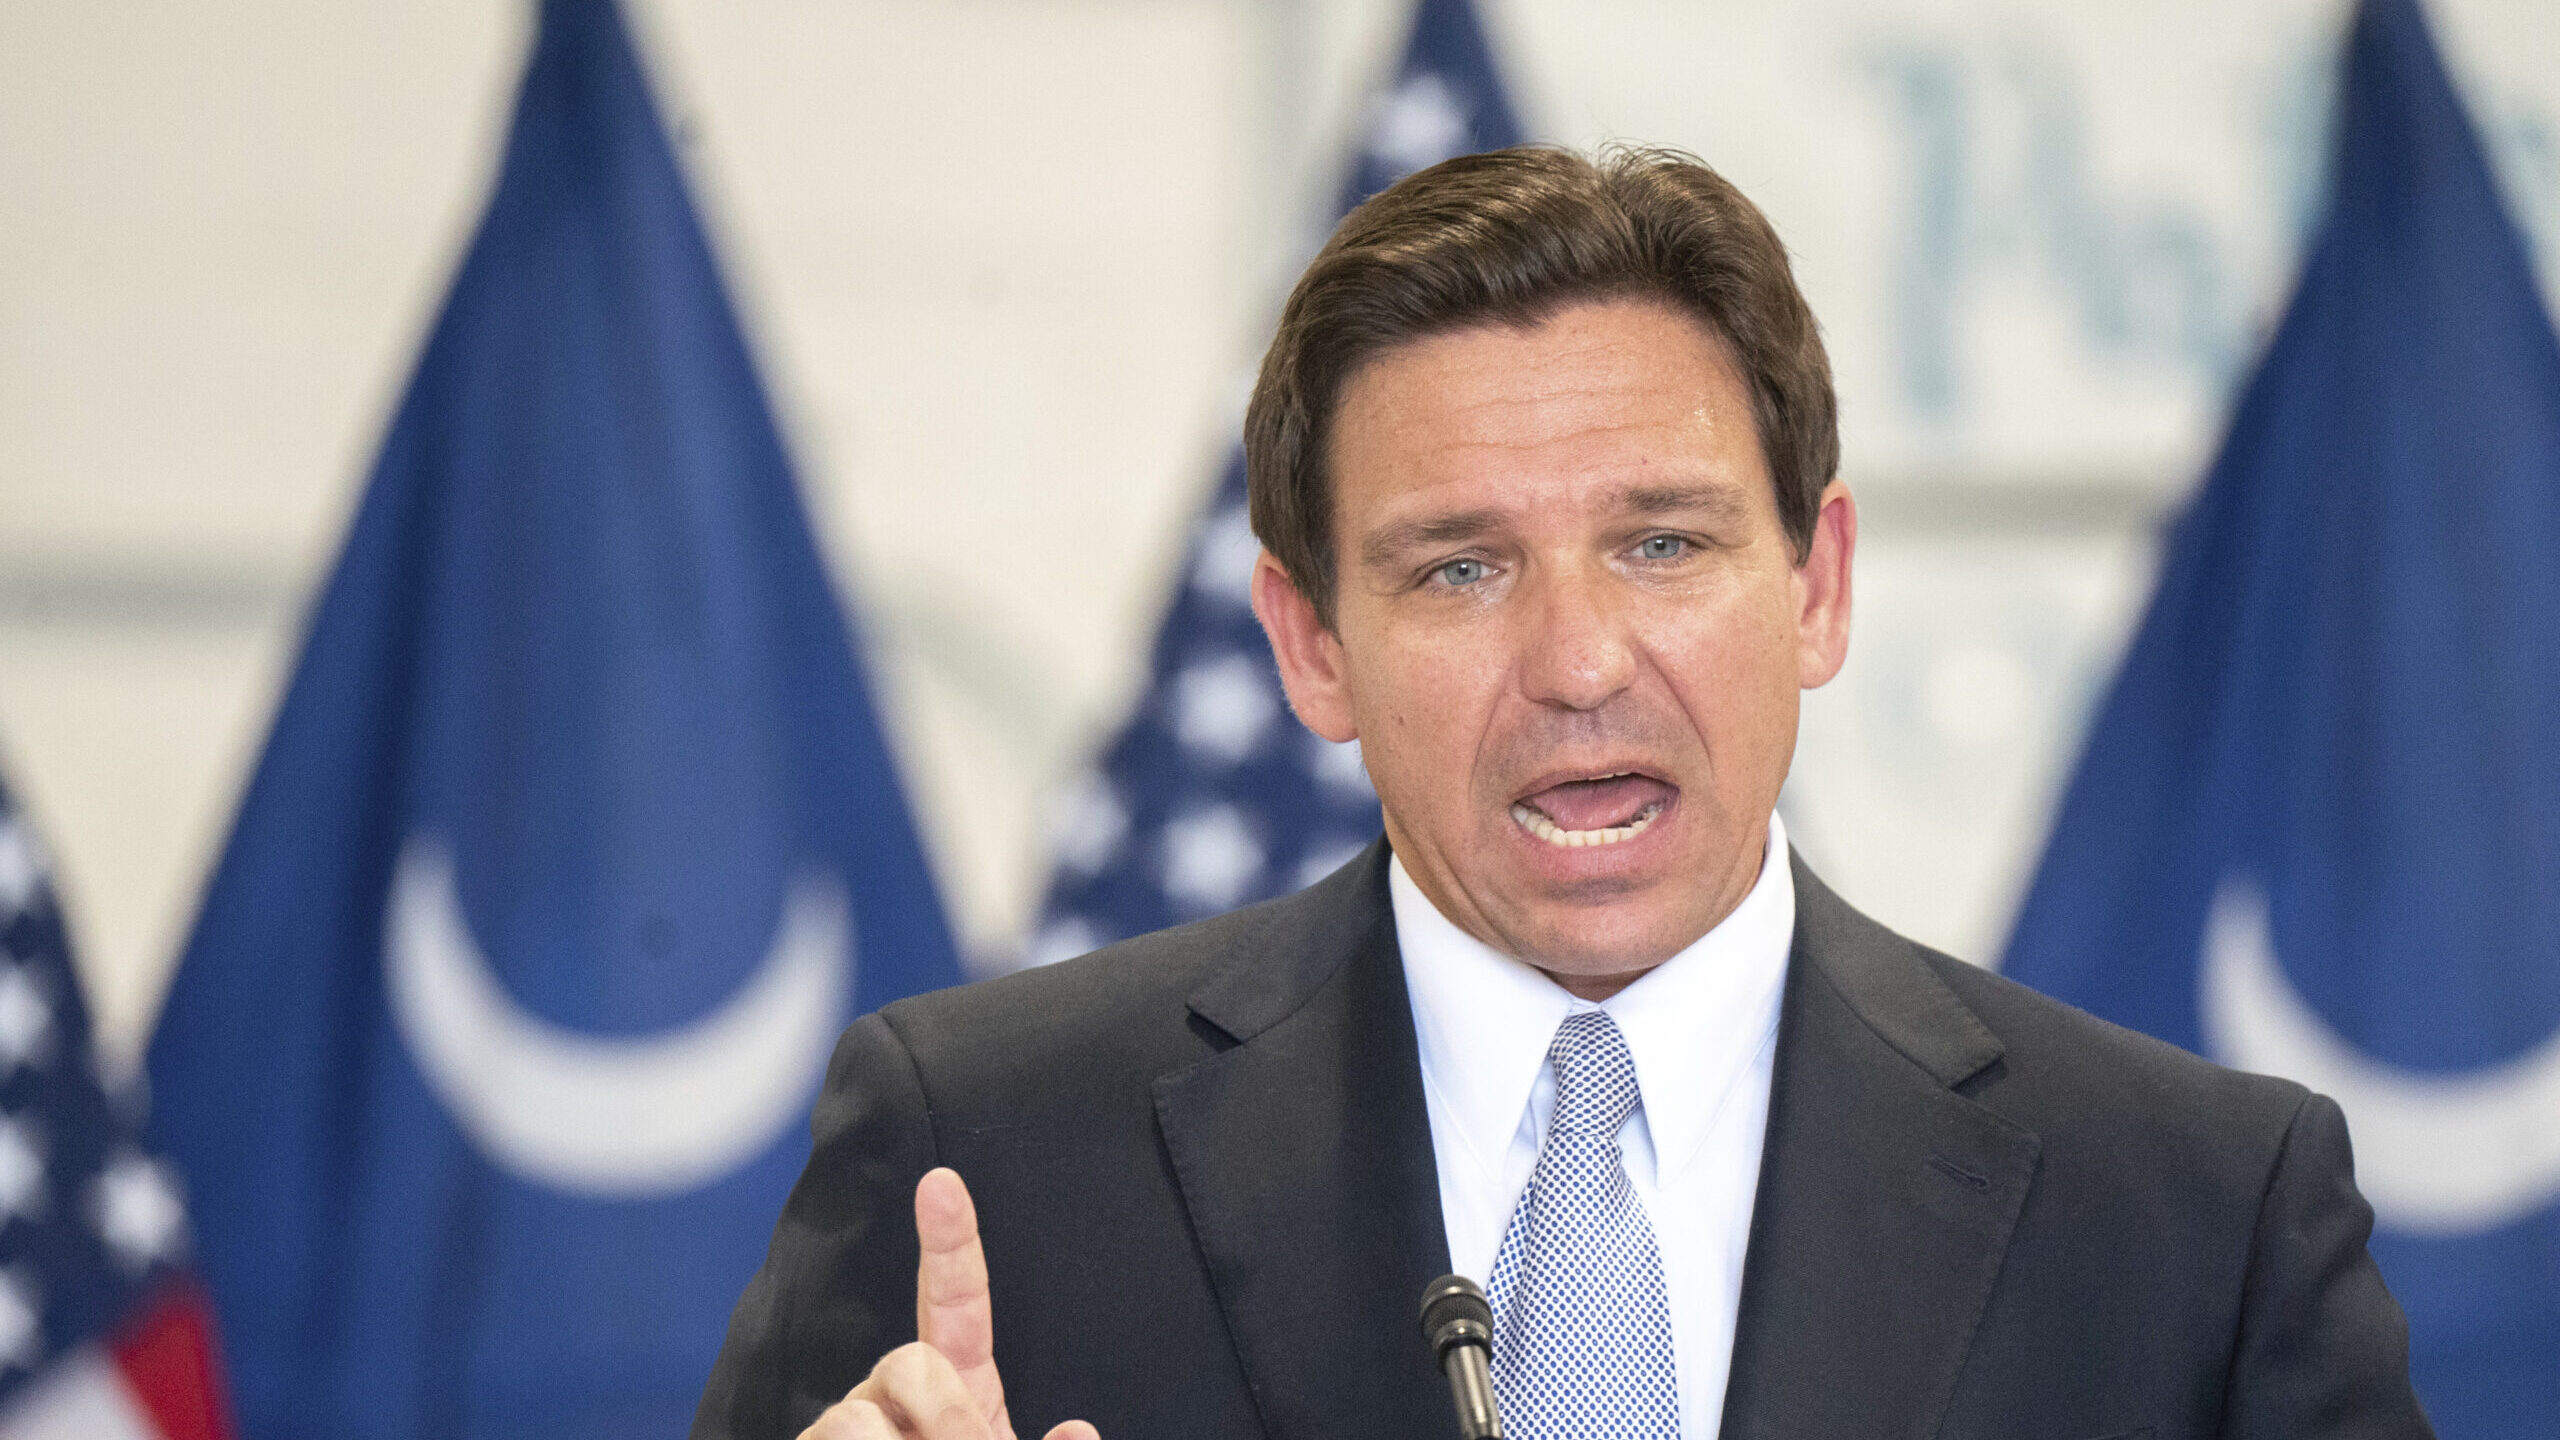 ron desantis, who will make an appearance in utah friday...